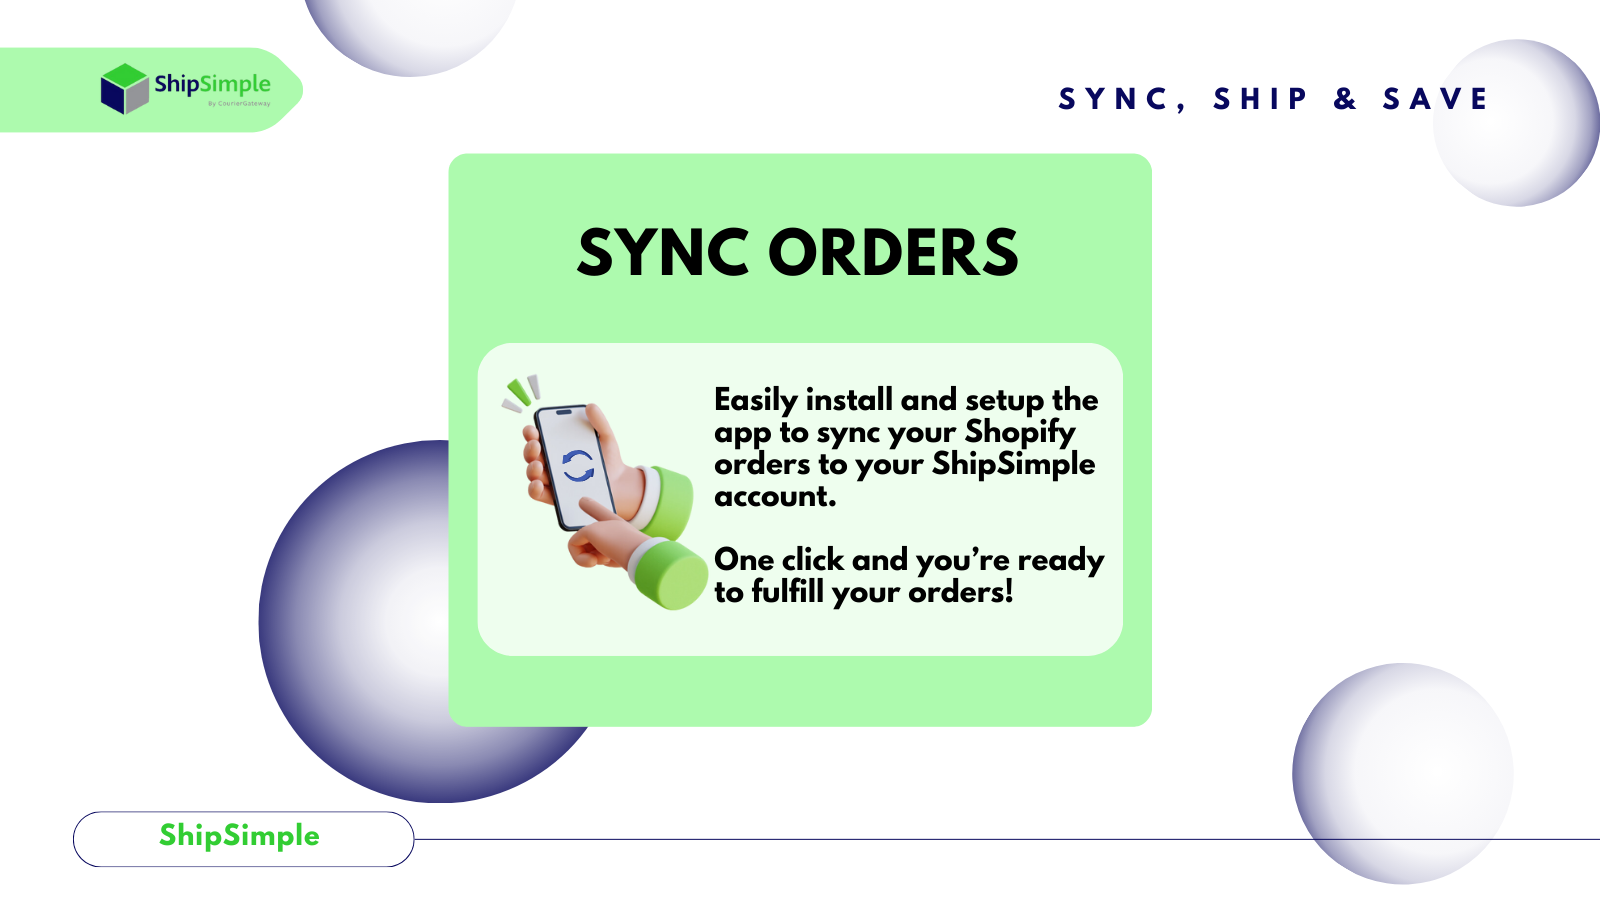 Sync Orders - One click and you're ready to fulfill your orders!